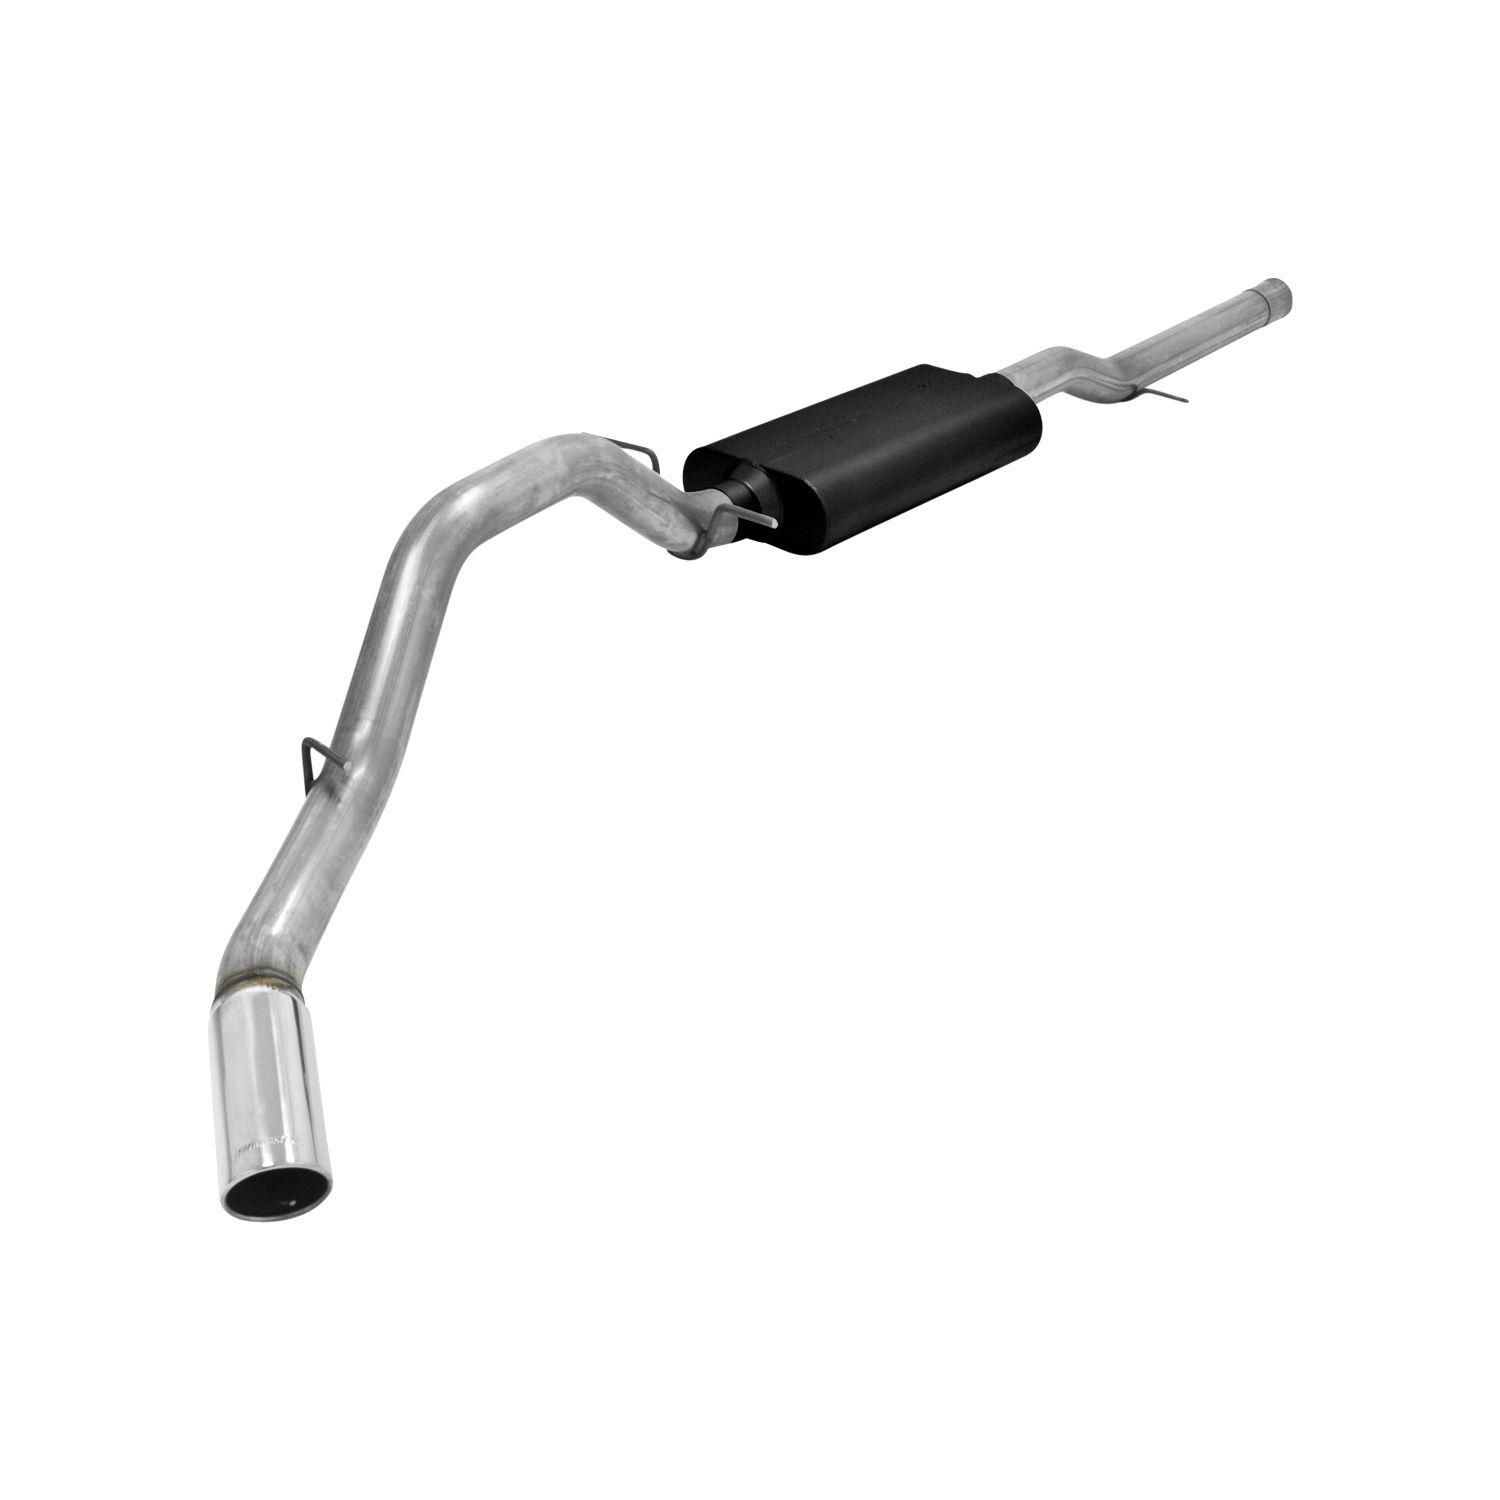 2011-2013 GMC Sierra 1500 SLE 6.2L Crew Cab/EXT Cab Flowmaster Force II Cat-Back Exhaust 69.3 inch Bed - 817603